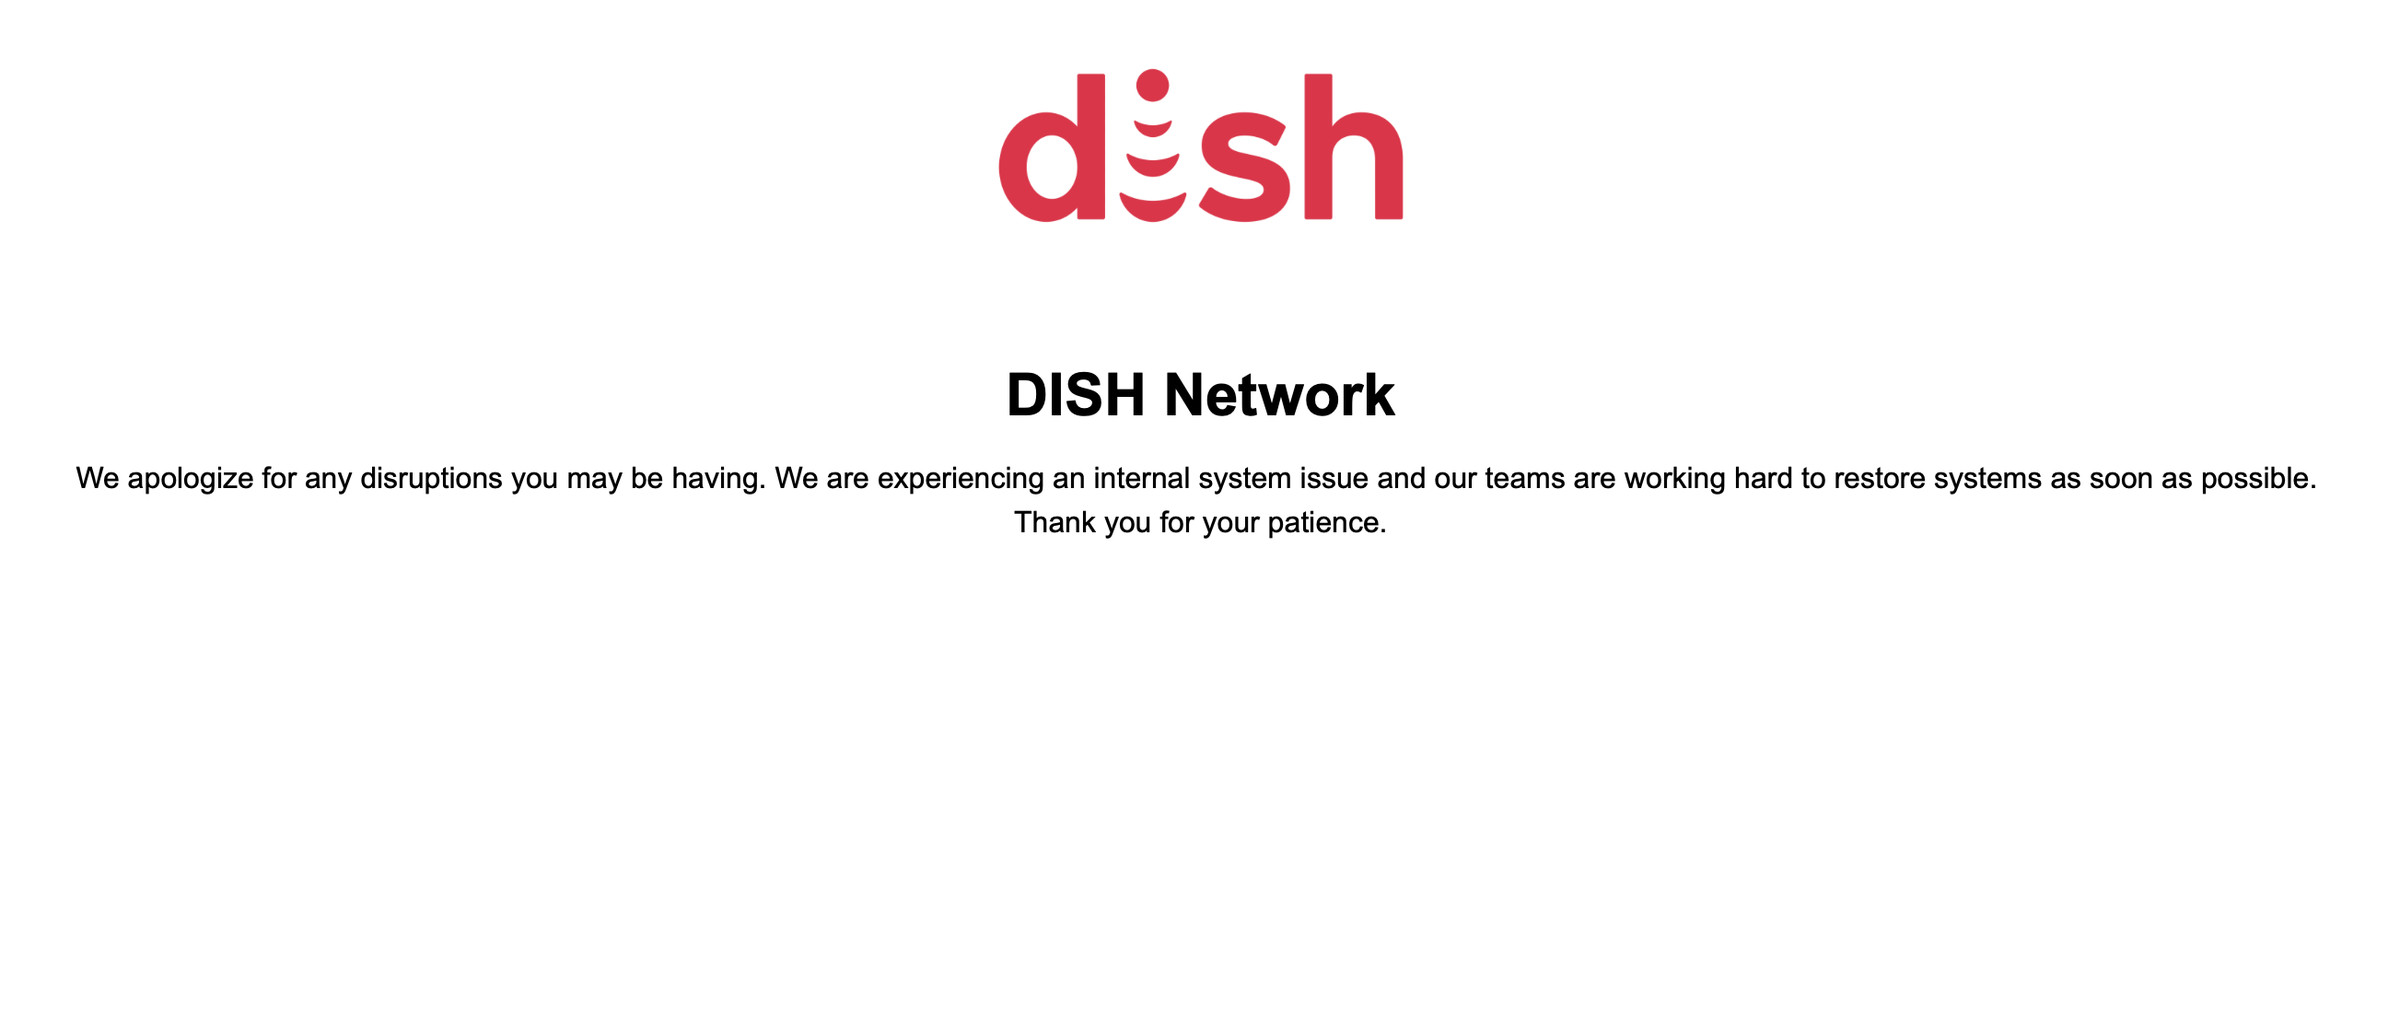 Screenshot of Dish’s website with the text: “We apologize for any disruptions you may be having. We are experiencing an internal system issue and our teams are working hard to restore systems as soon as possible.&nbsp;Thank you for your patience.”